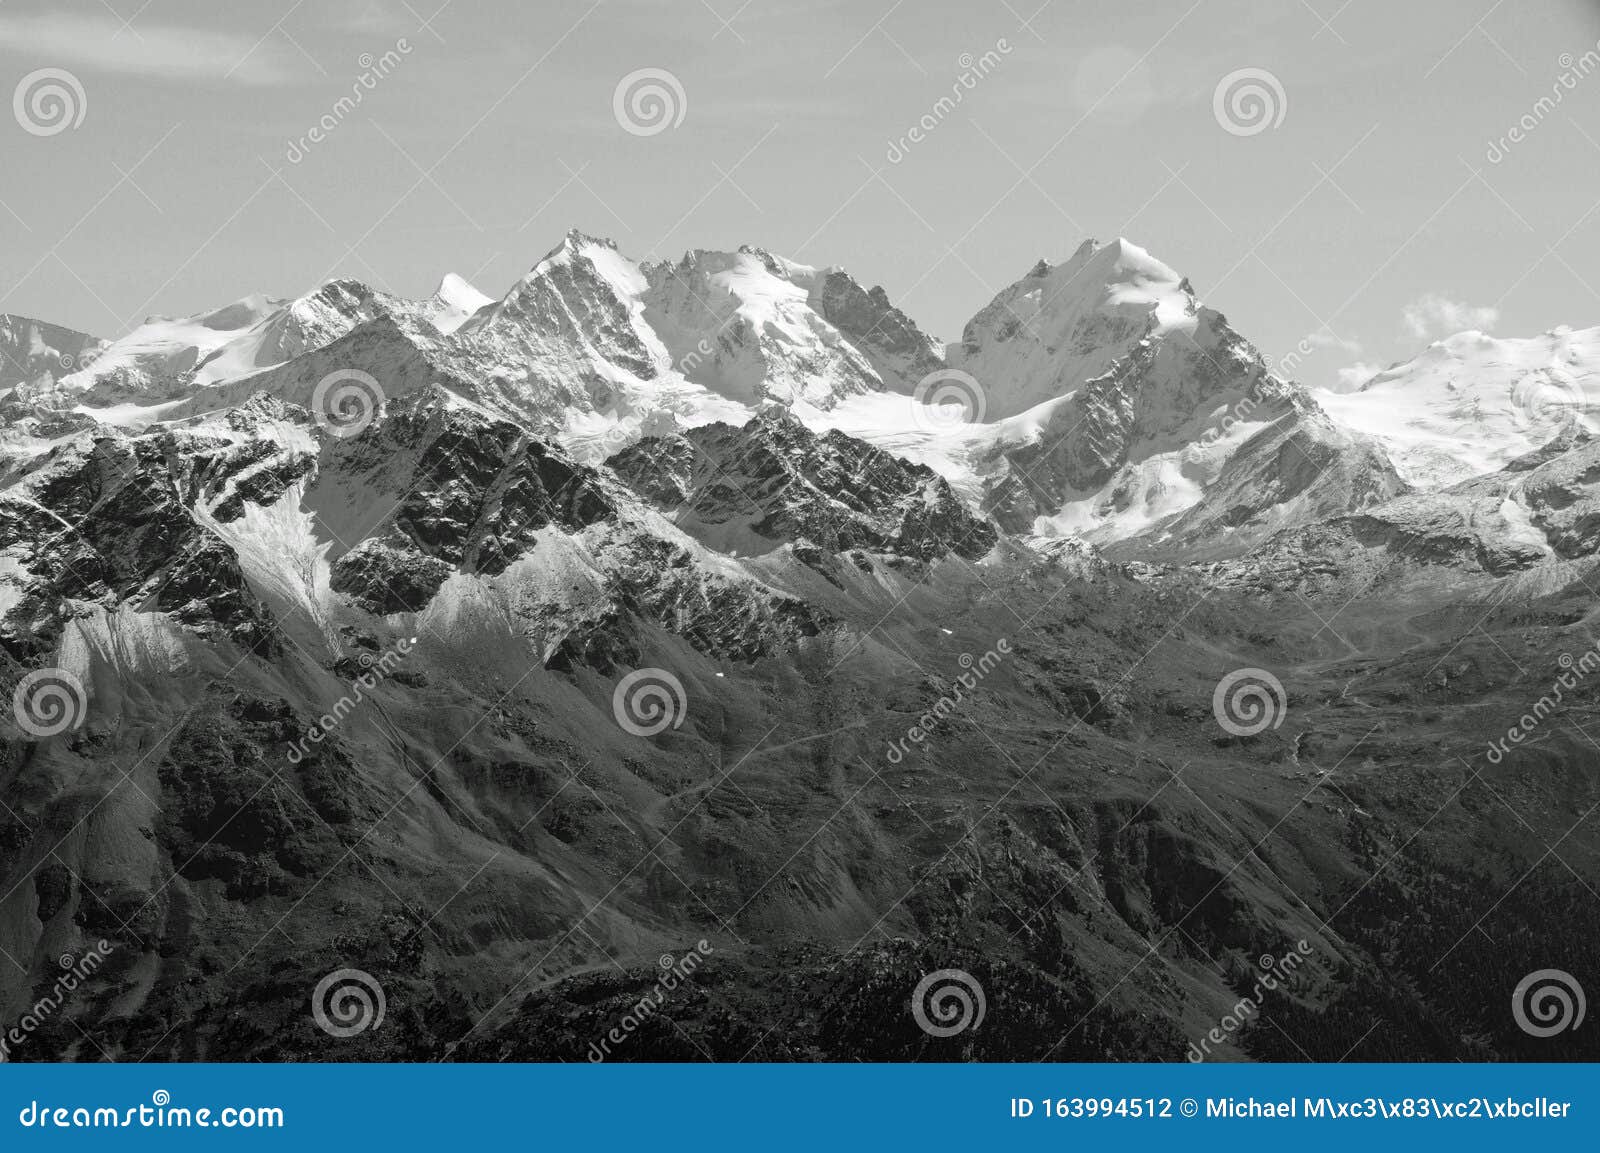 swiss alps: snow mountain panorama from julier in the upper engadin